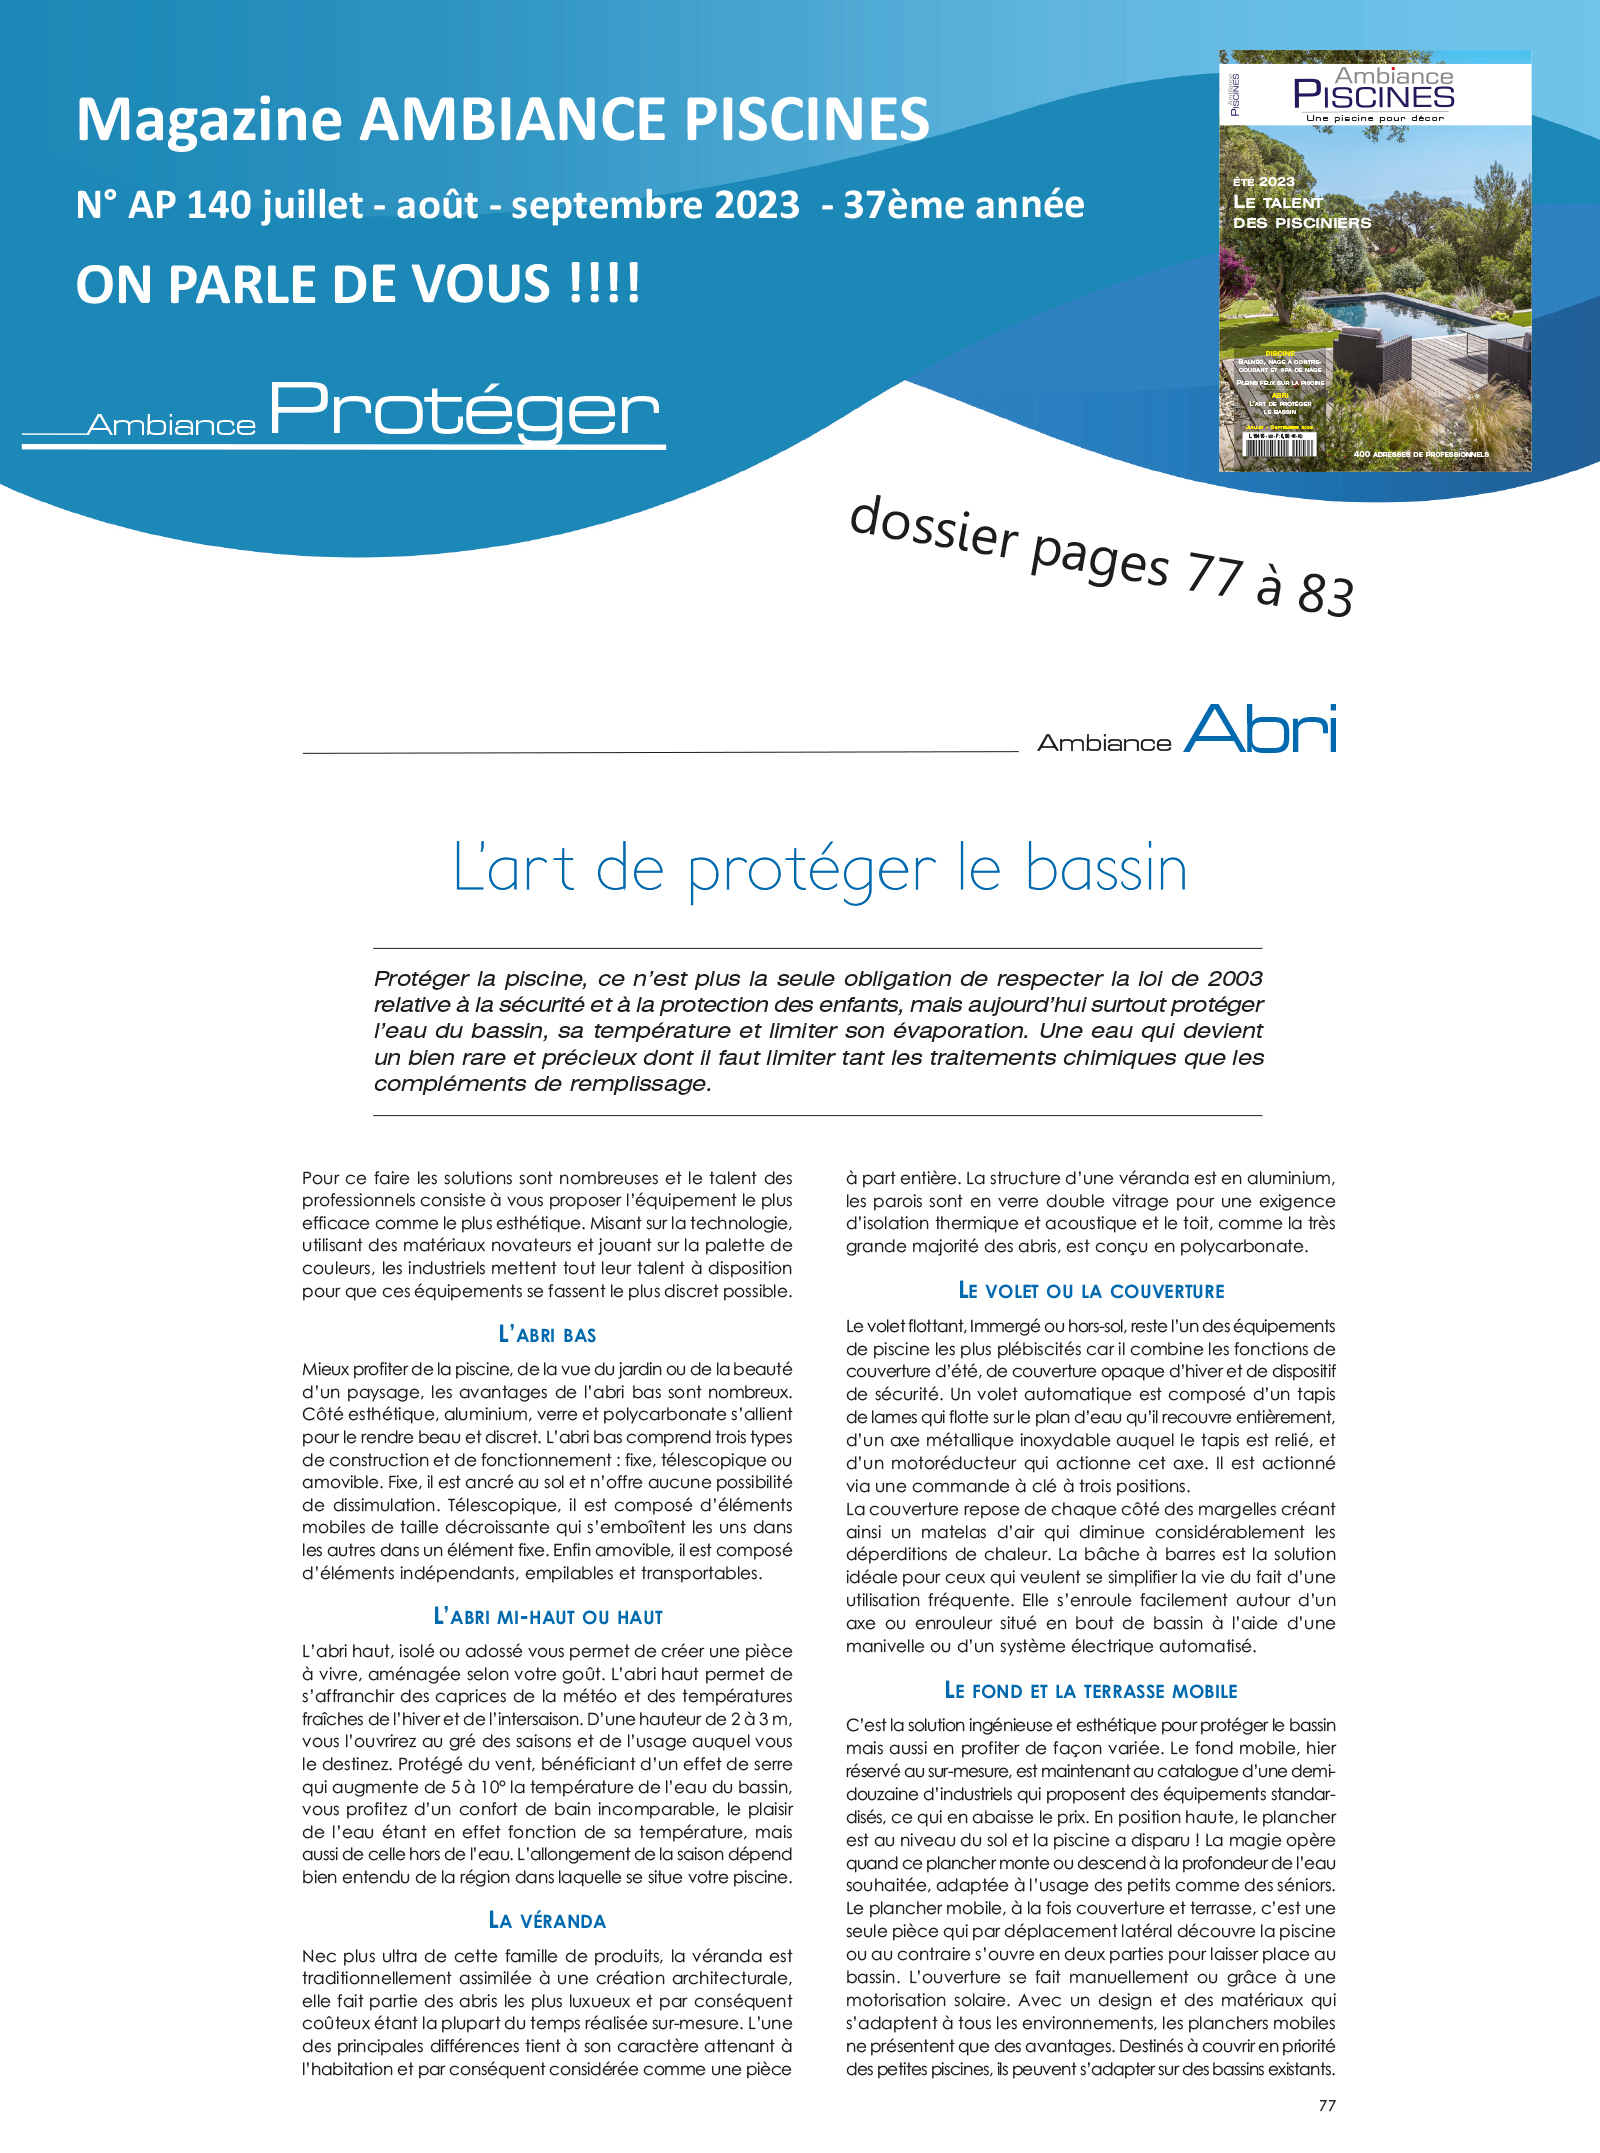 Magazine Ambiance Piscines n° 140 - page 2